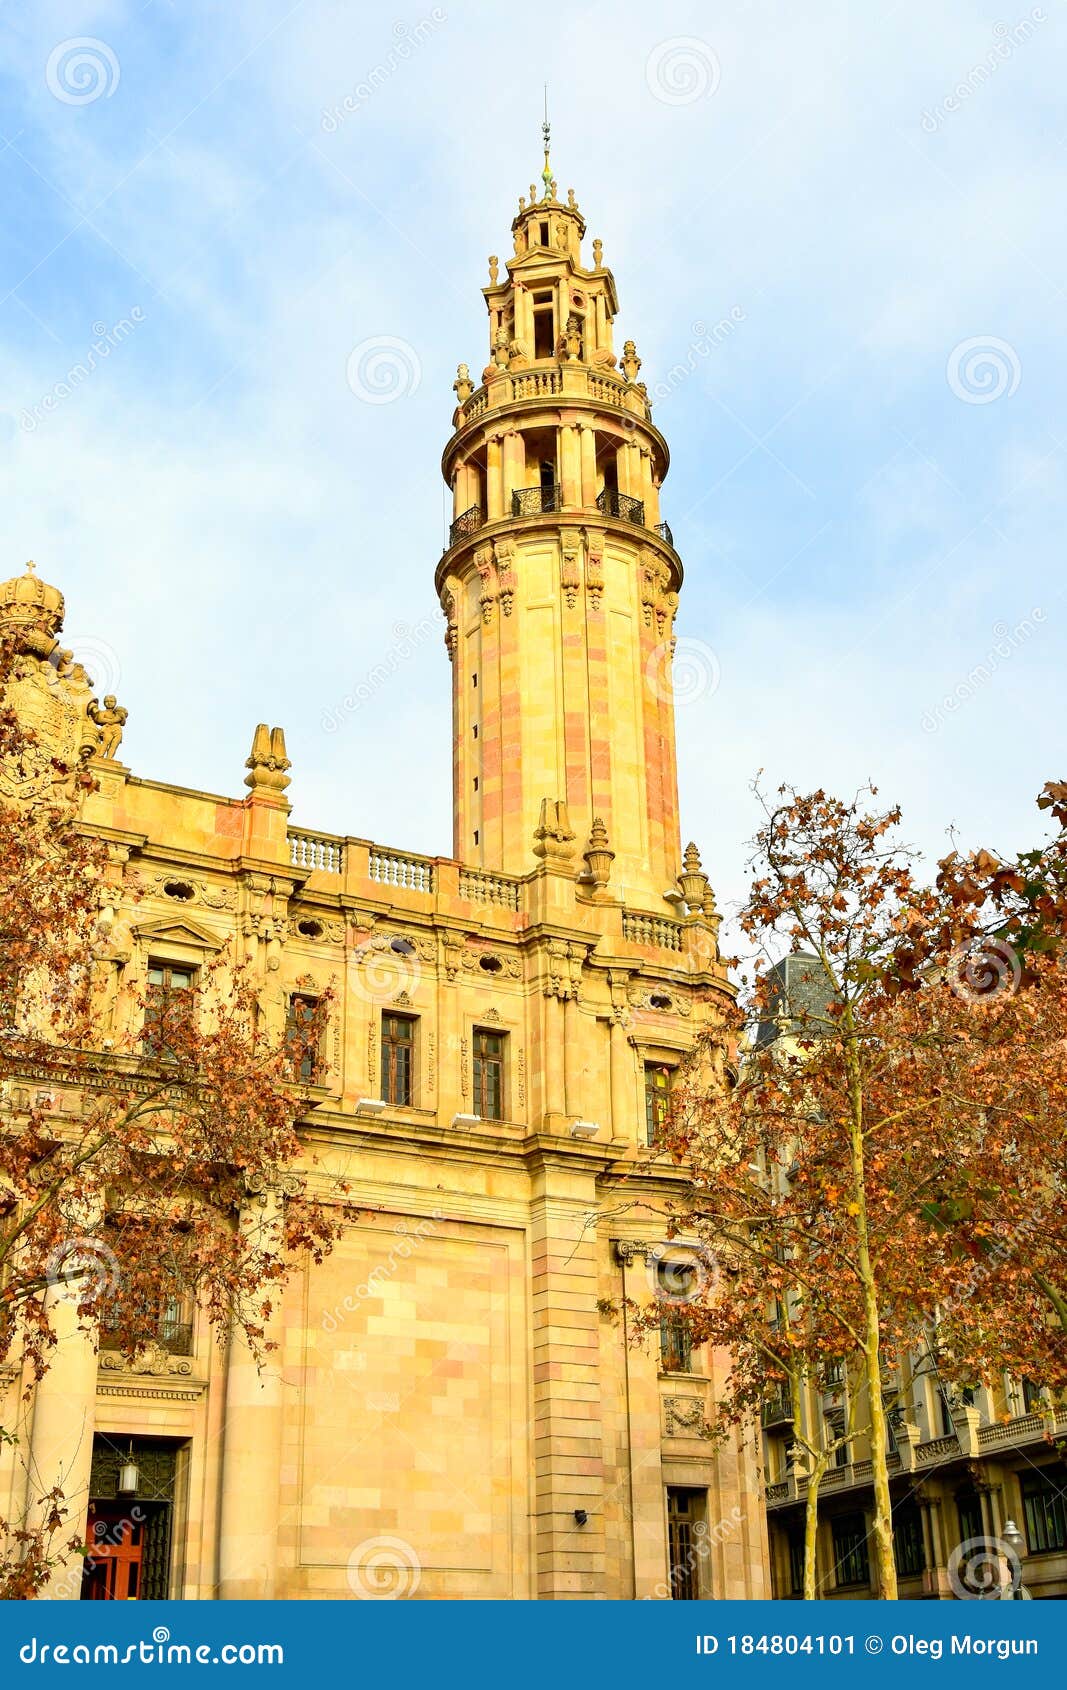 the central post office building correos y telÃÂ©grafos in barcelona, spain ed in 1914 by architects and goday josep casals